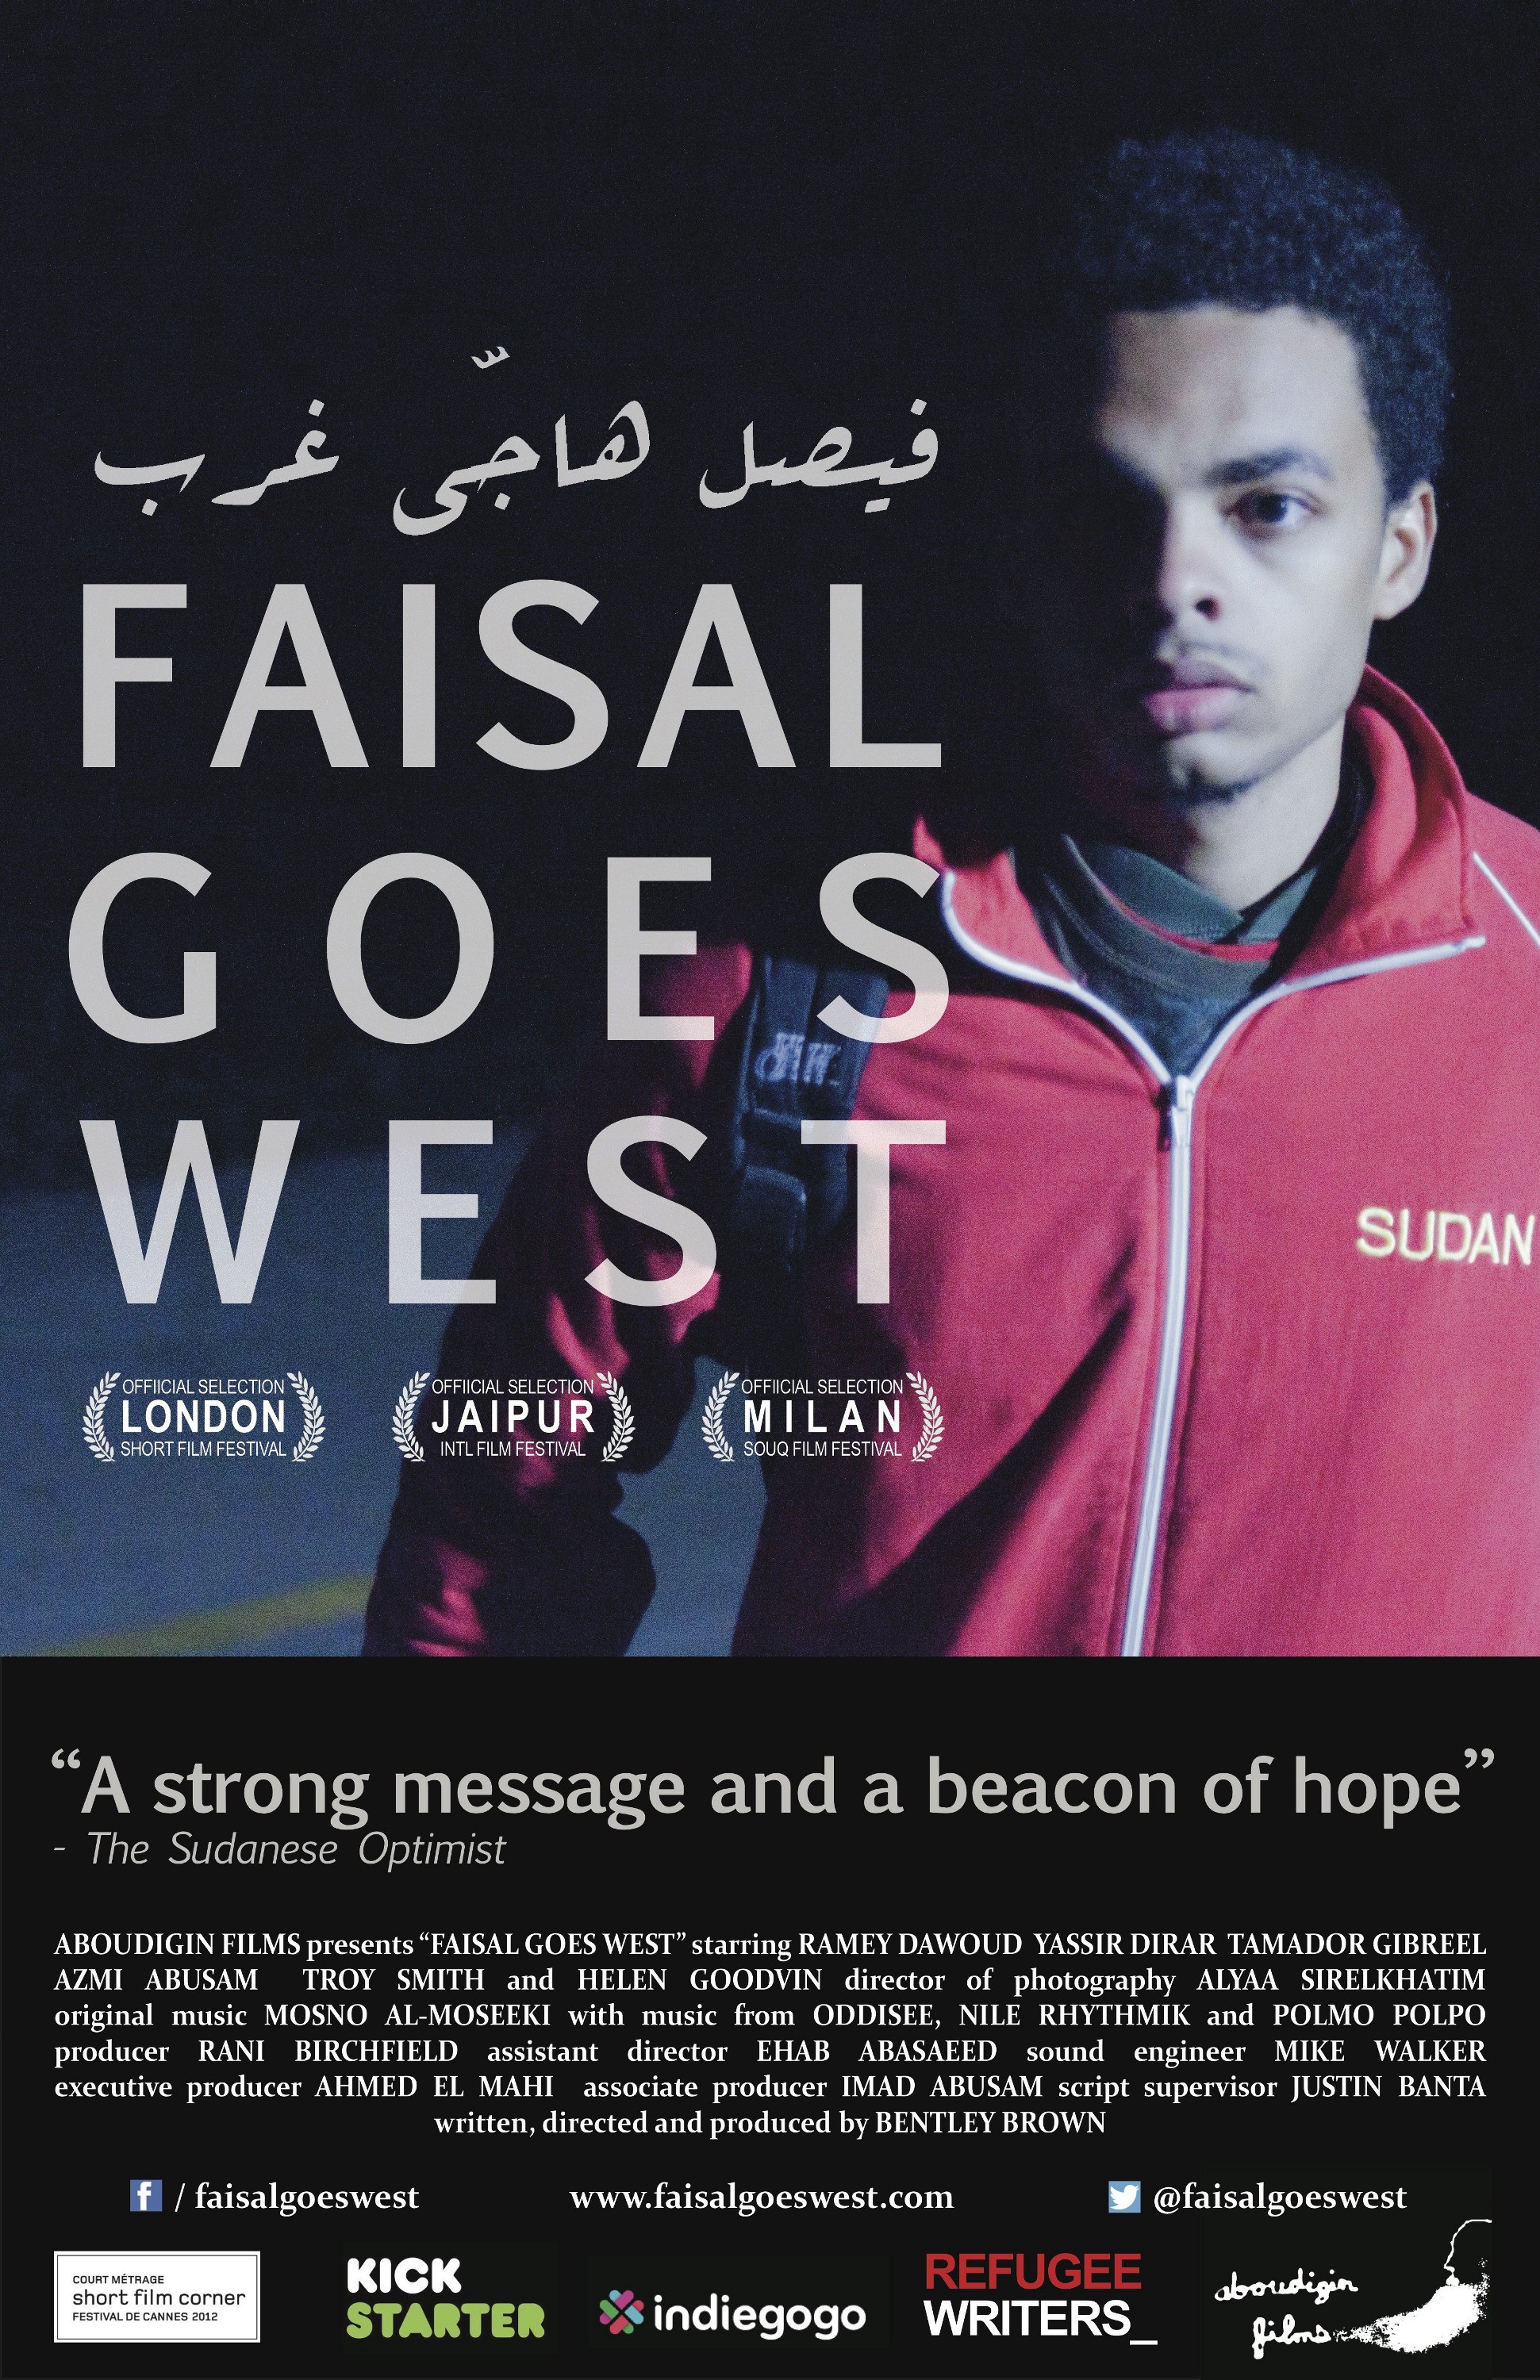 Mega Sized Movie Poster Image for Faisal Goes West